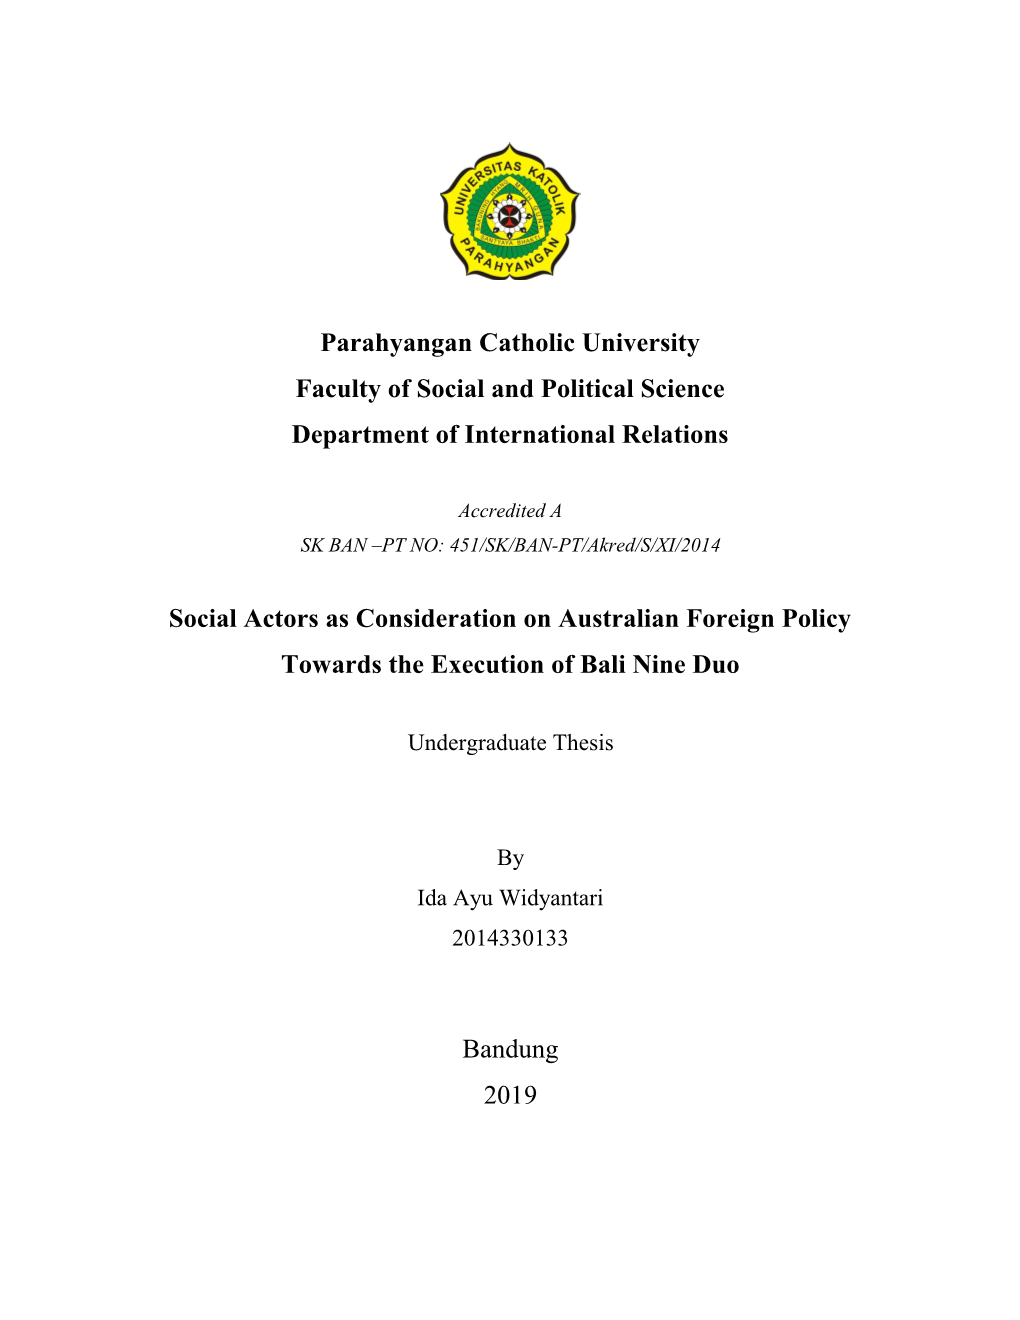 Parahyangan Catholic University Faculty of Social and Political Science Department of International Relations